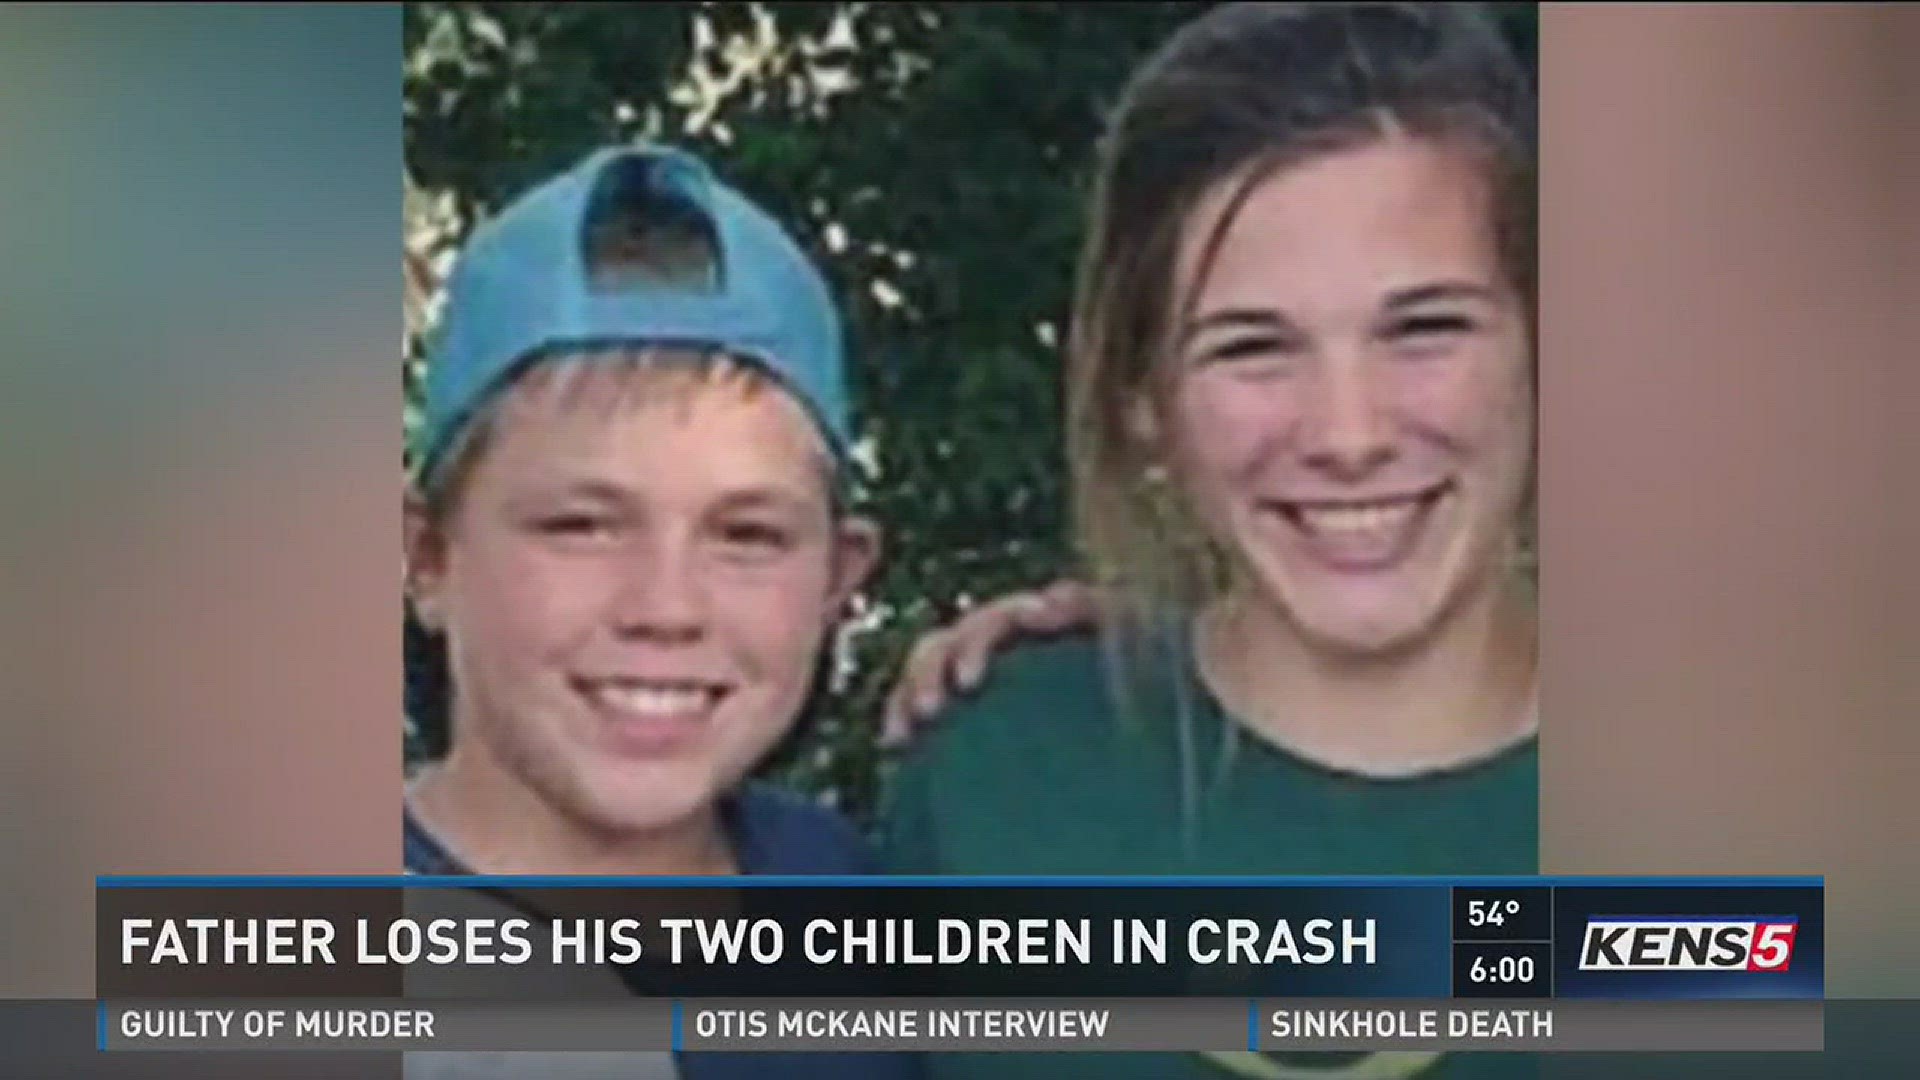 Father loses his two children in crash